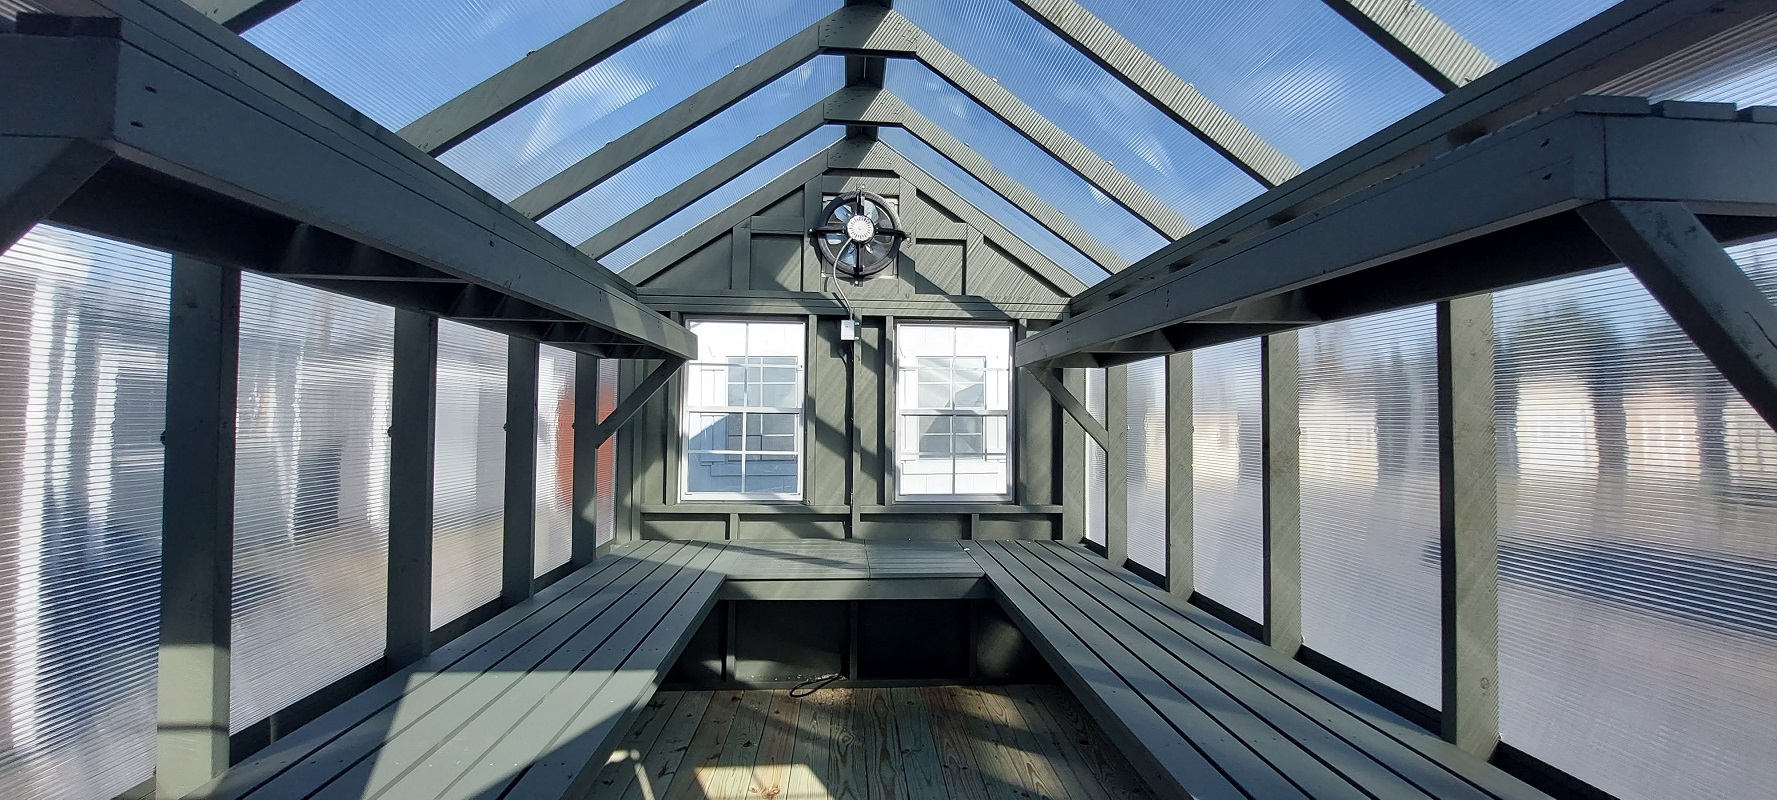 Interior of blue greenhouse, showcasing ceiling, windows and ventilation